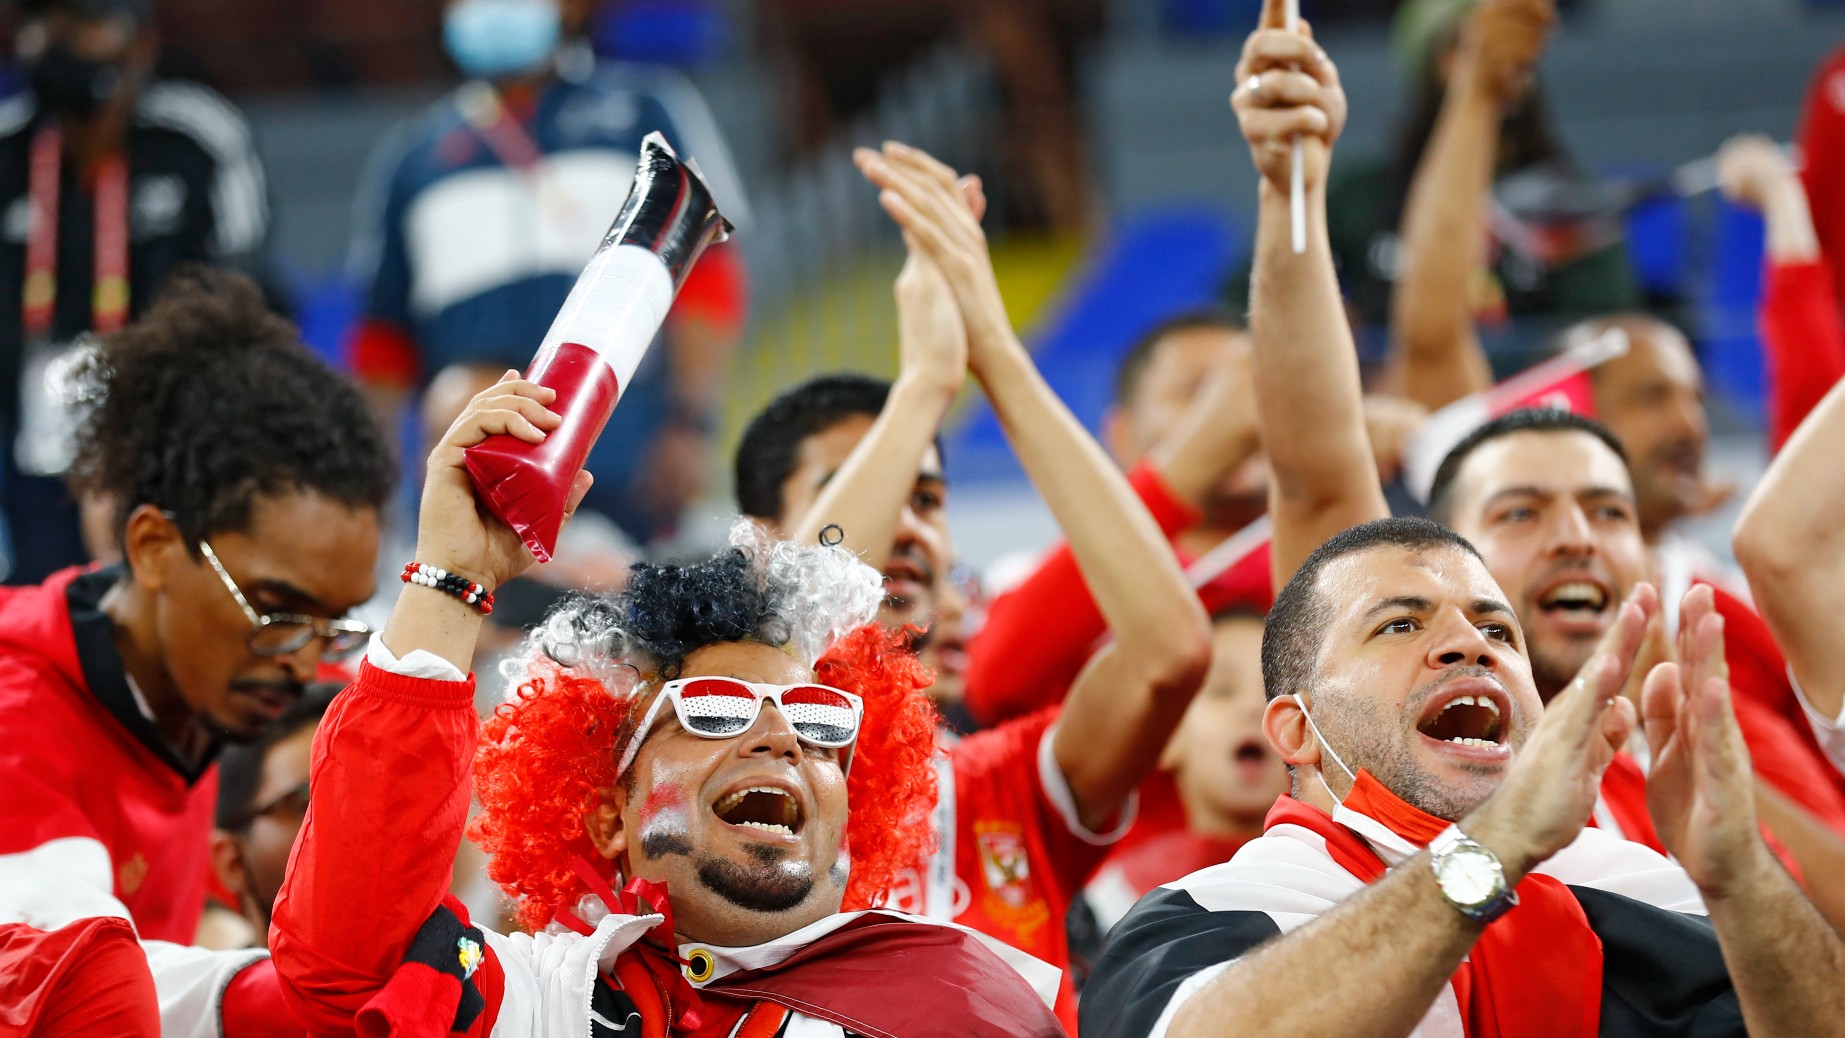 Egypt's supporters cheer ahead of the FIFA Arab Cup 2021 semi-final football match between Tunisia and Egypt at the 974 stadium in the Qatari capital of Doha on December 15, 2021.